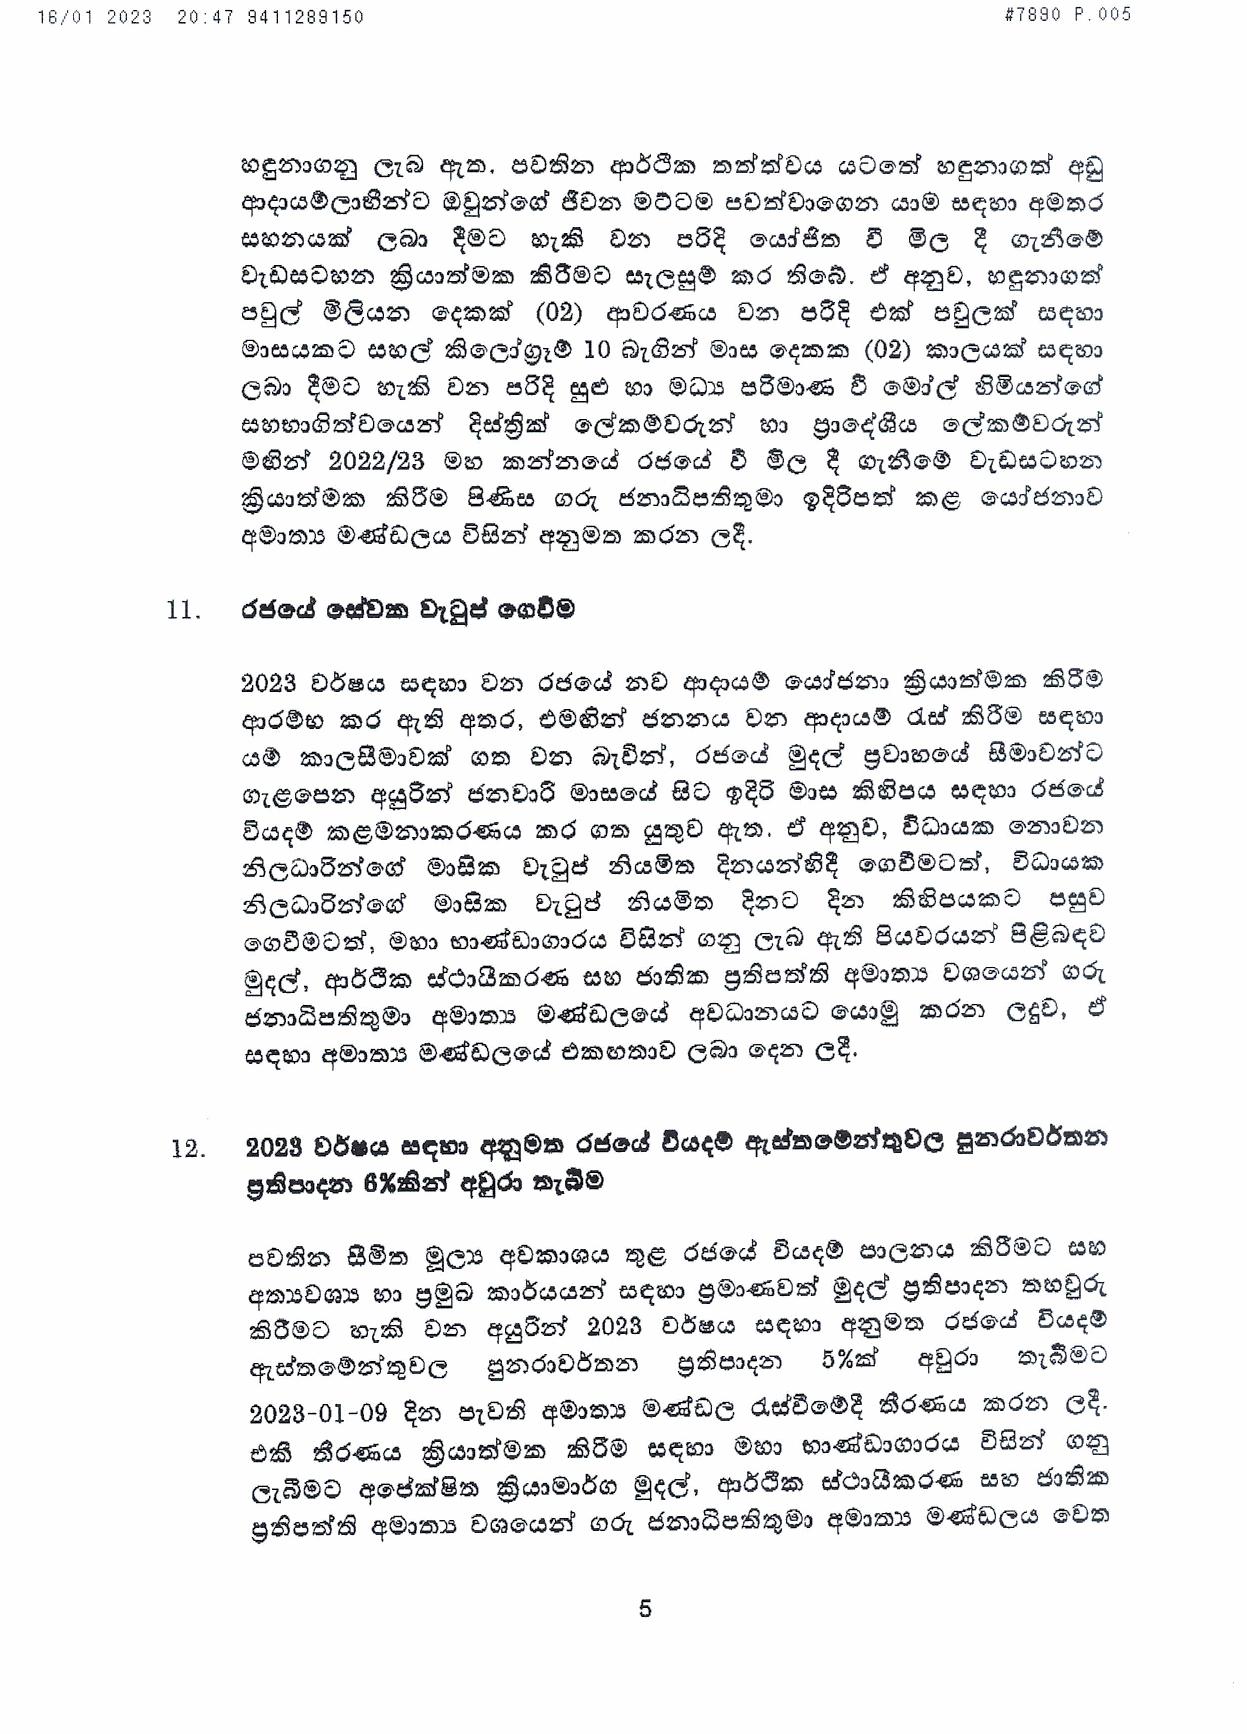 Cabinet Decision on 16.01.2023 page 005